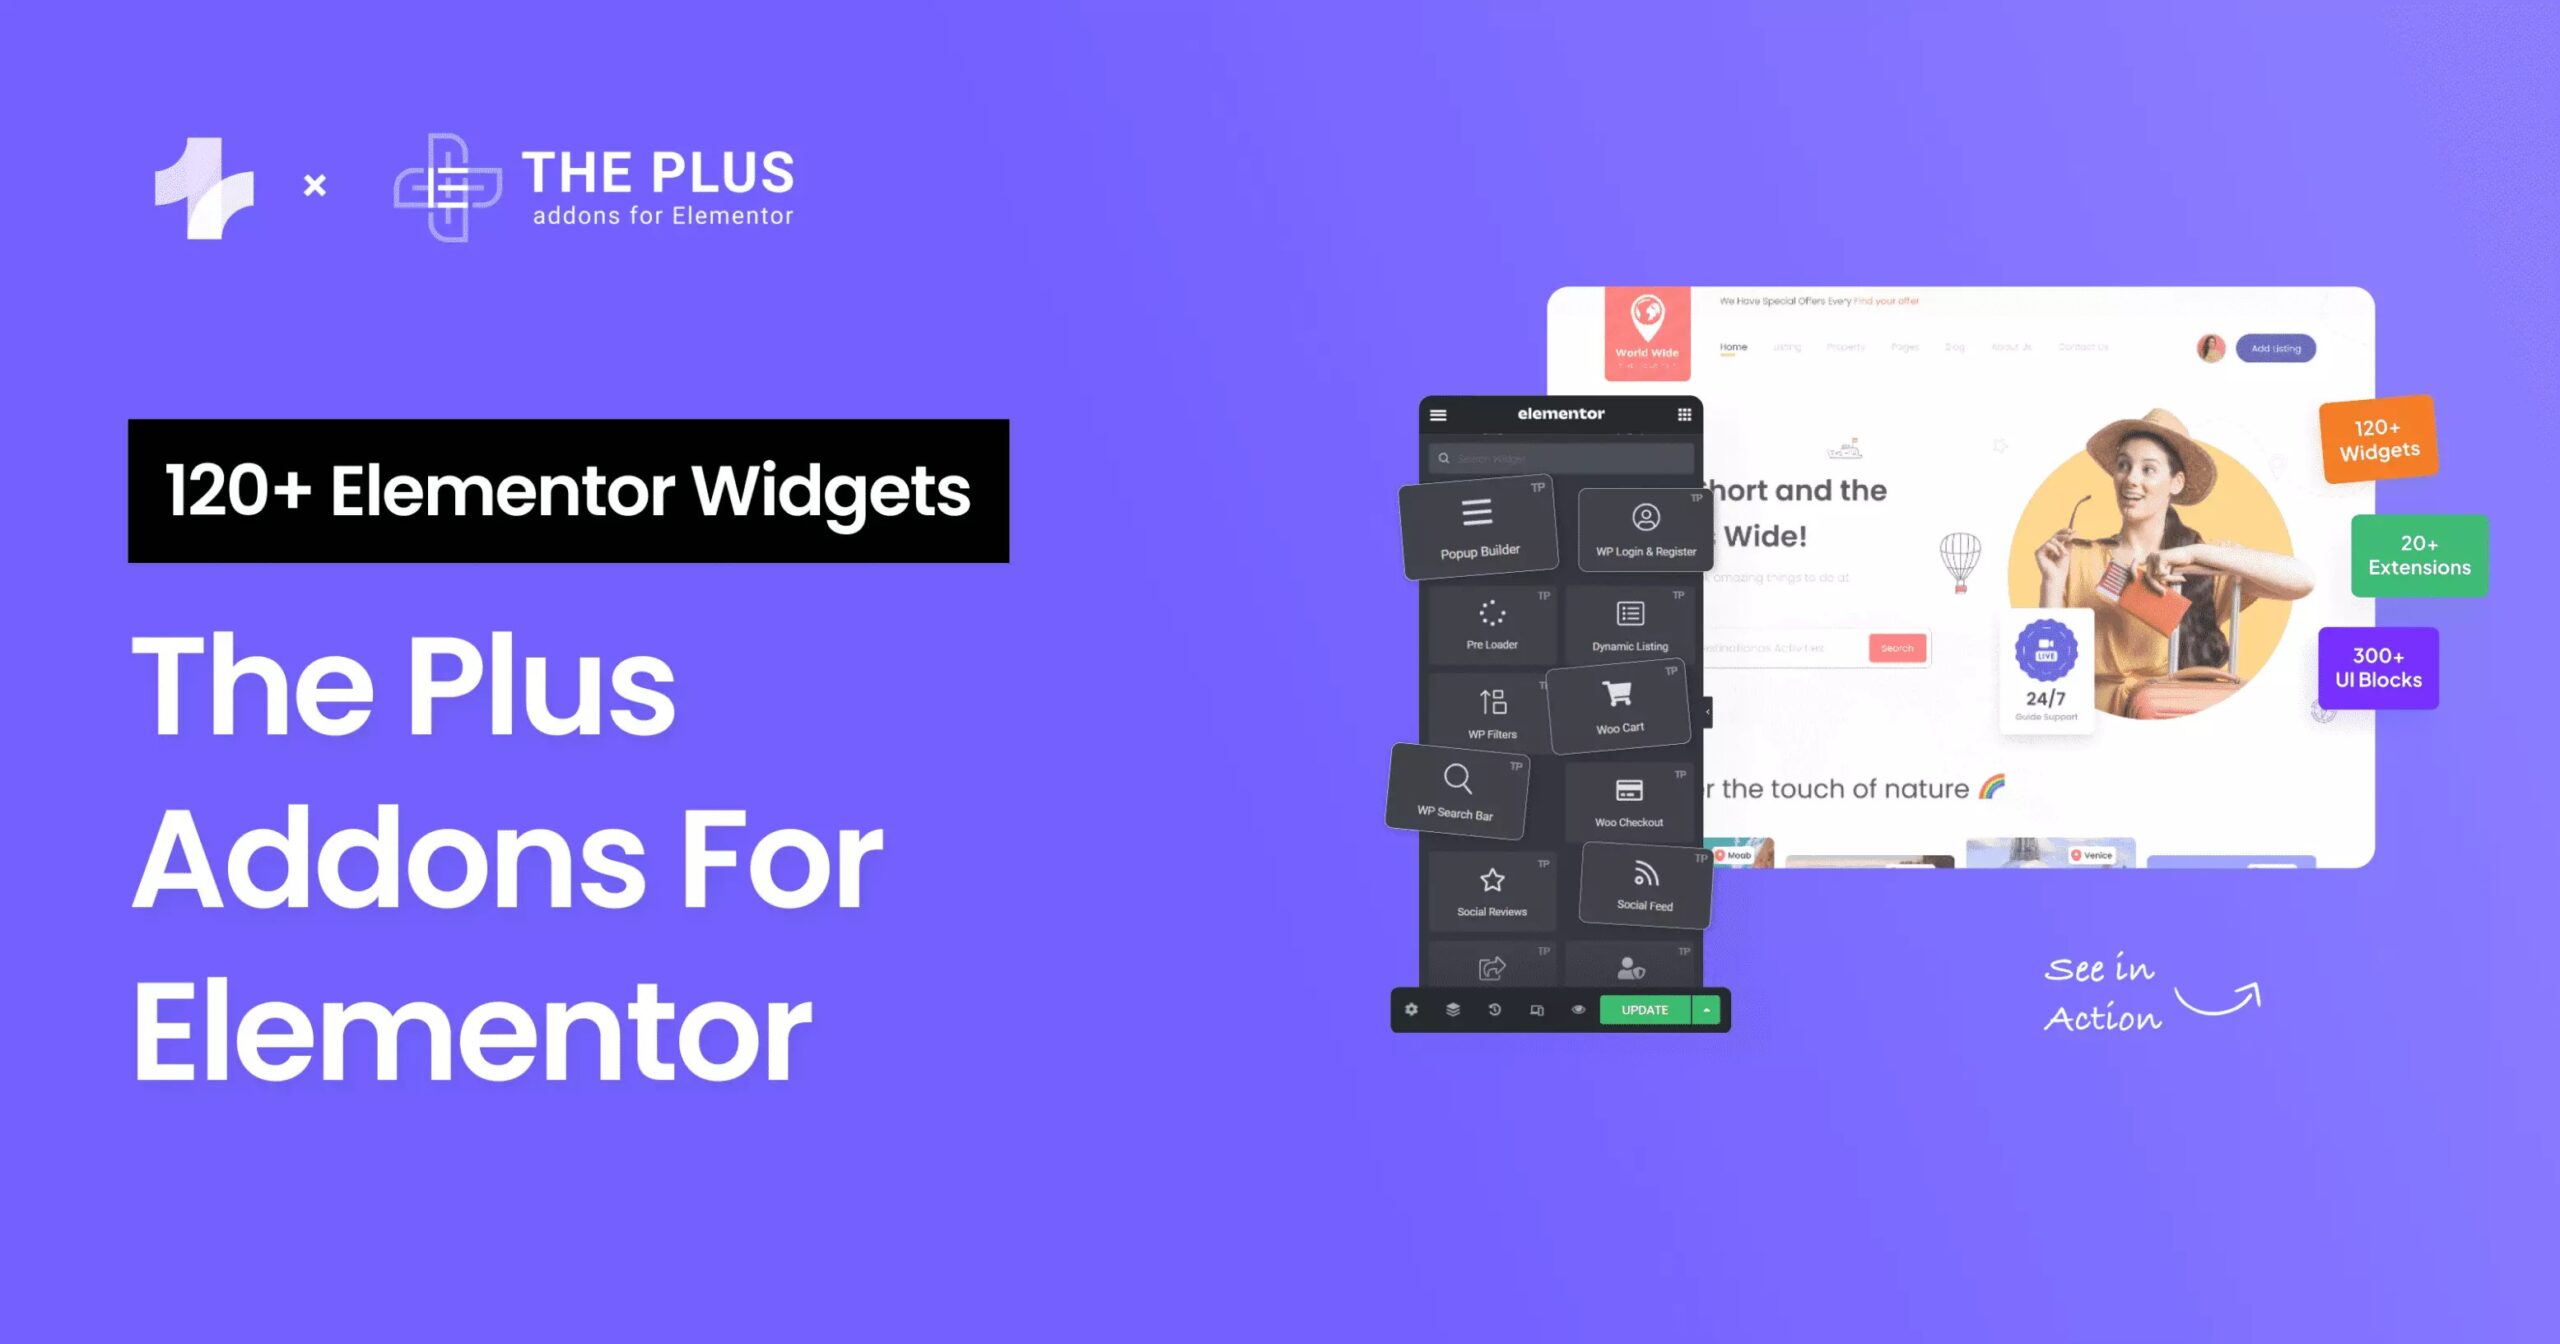 ThePlus Addon for Elementor - The Plus - Addon for Elementor Page Builder WP Plugin v5.5.1 by Codecanyon Nulled Free Download